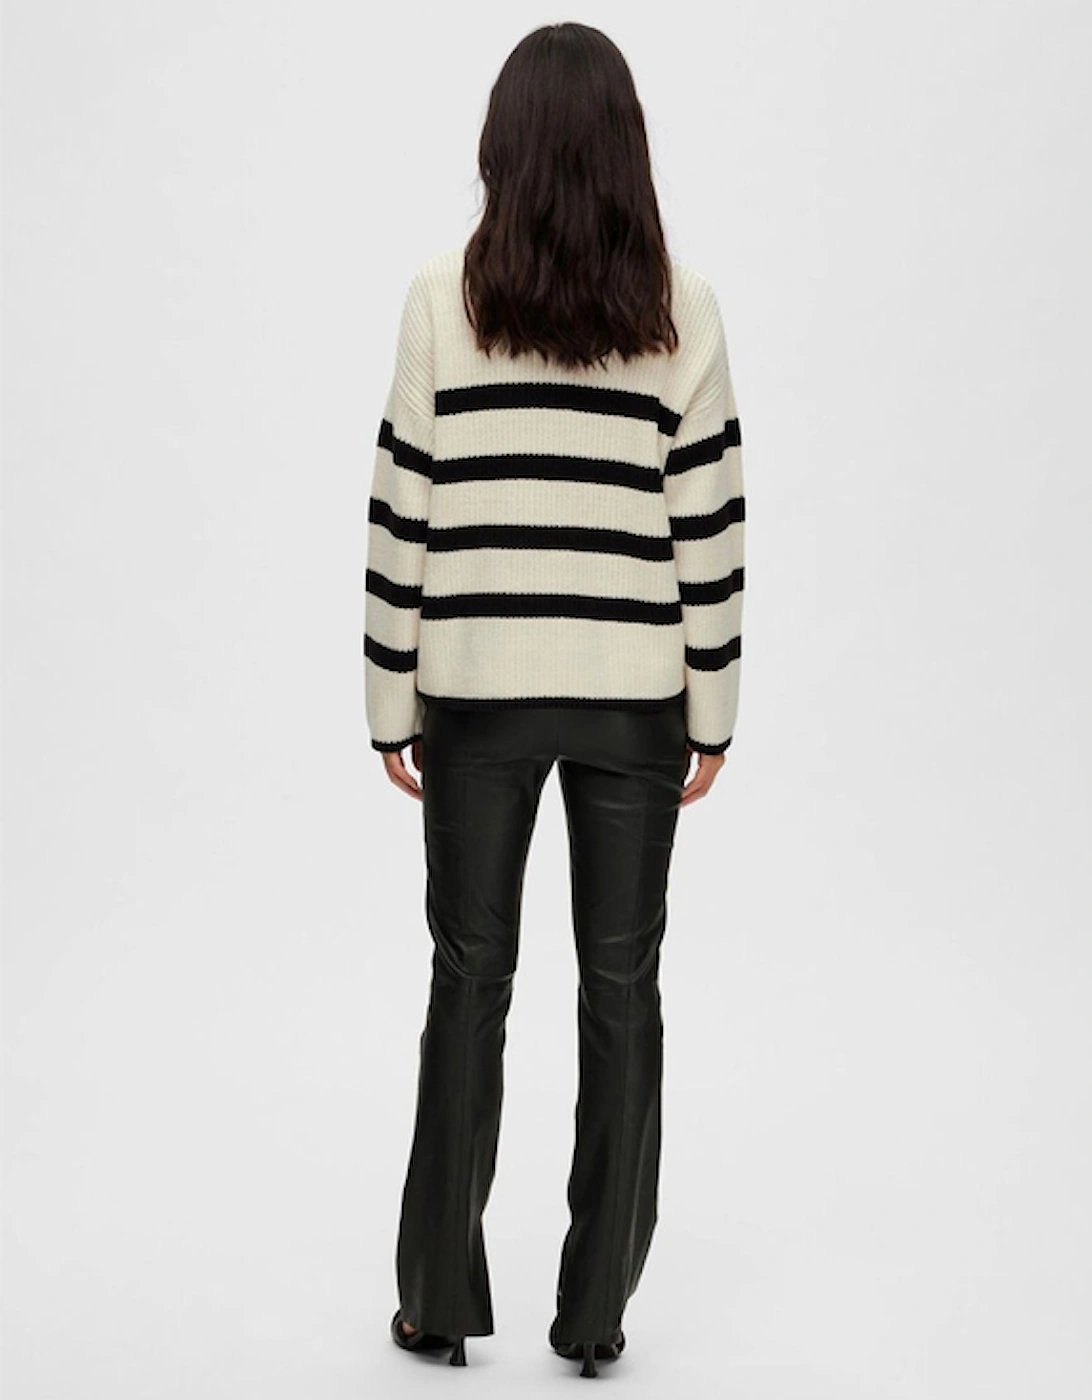 Femme Bloomie Long Sleeve Knit O-Neck Snow White with Black Stripes